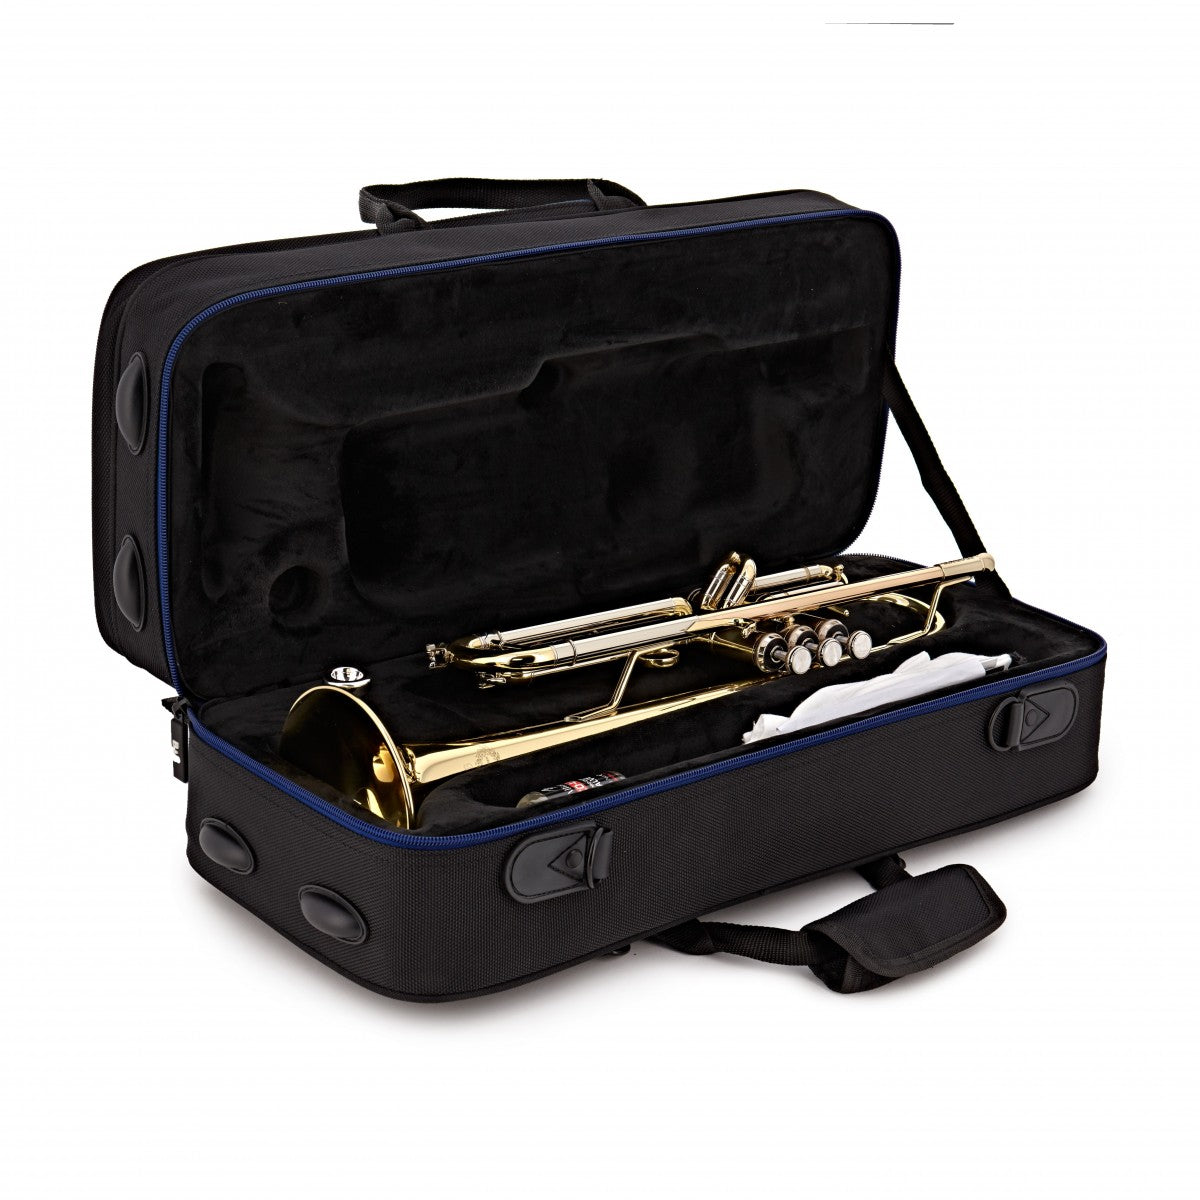 B&S Prodige Bb trumpet. Lacquer finish, standard lead pipe, back pack case